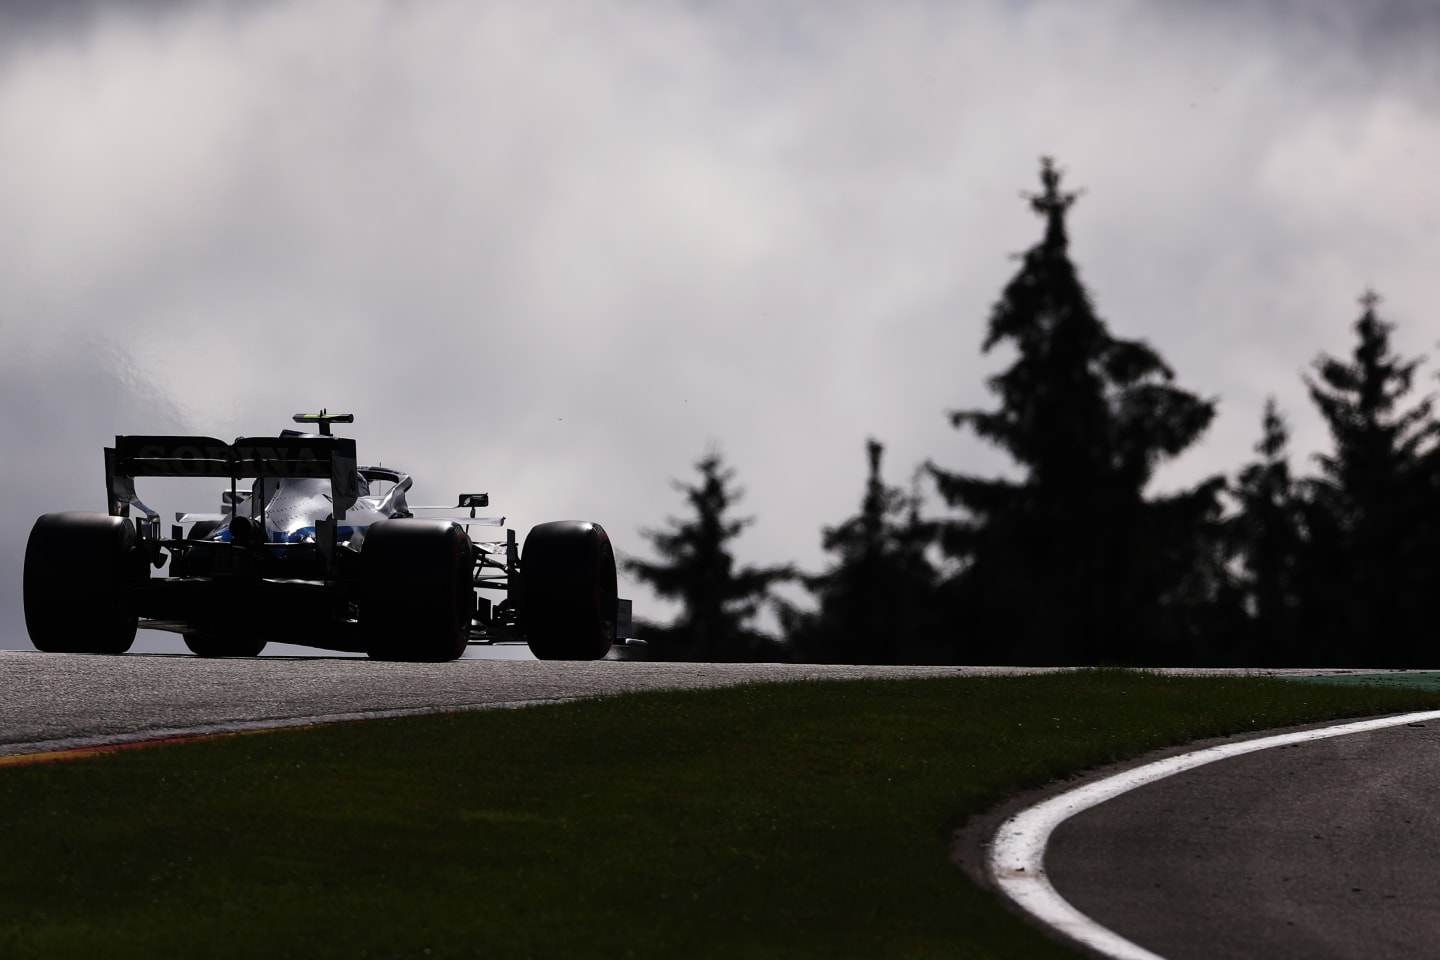 SPA, BELGIUM - AUGUST 29: Nicholas Latifi of Canada driving the (6) Williams Racing FW43 Mercedes drives on track during final practice for the F1 Grand Prix of Belgium at Circuit de Spa-Francorchamps on August 29, 2020 in Spa, Belgium. (Photo by Lars Baron/Getty Images)